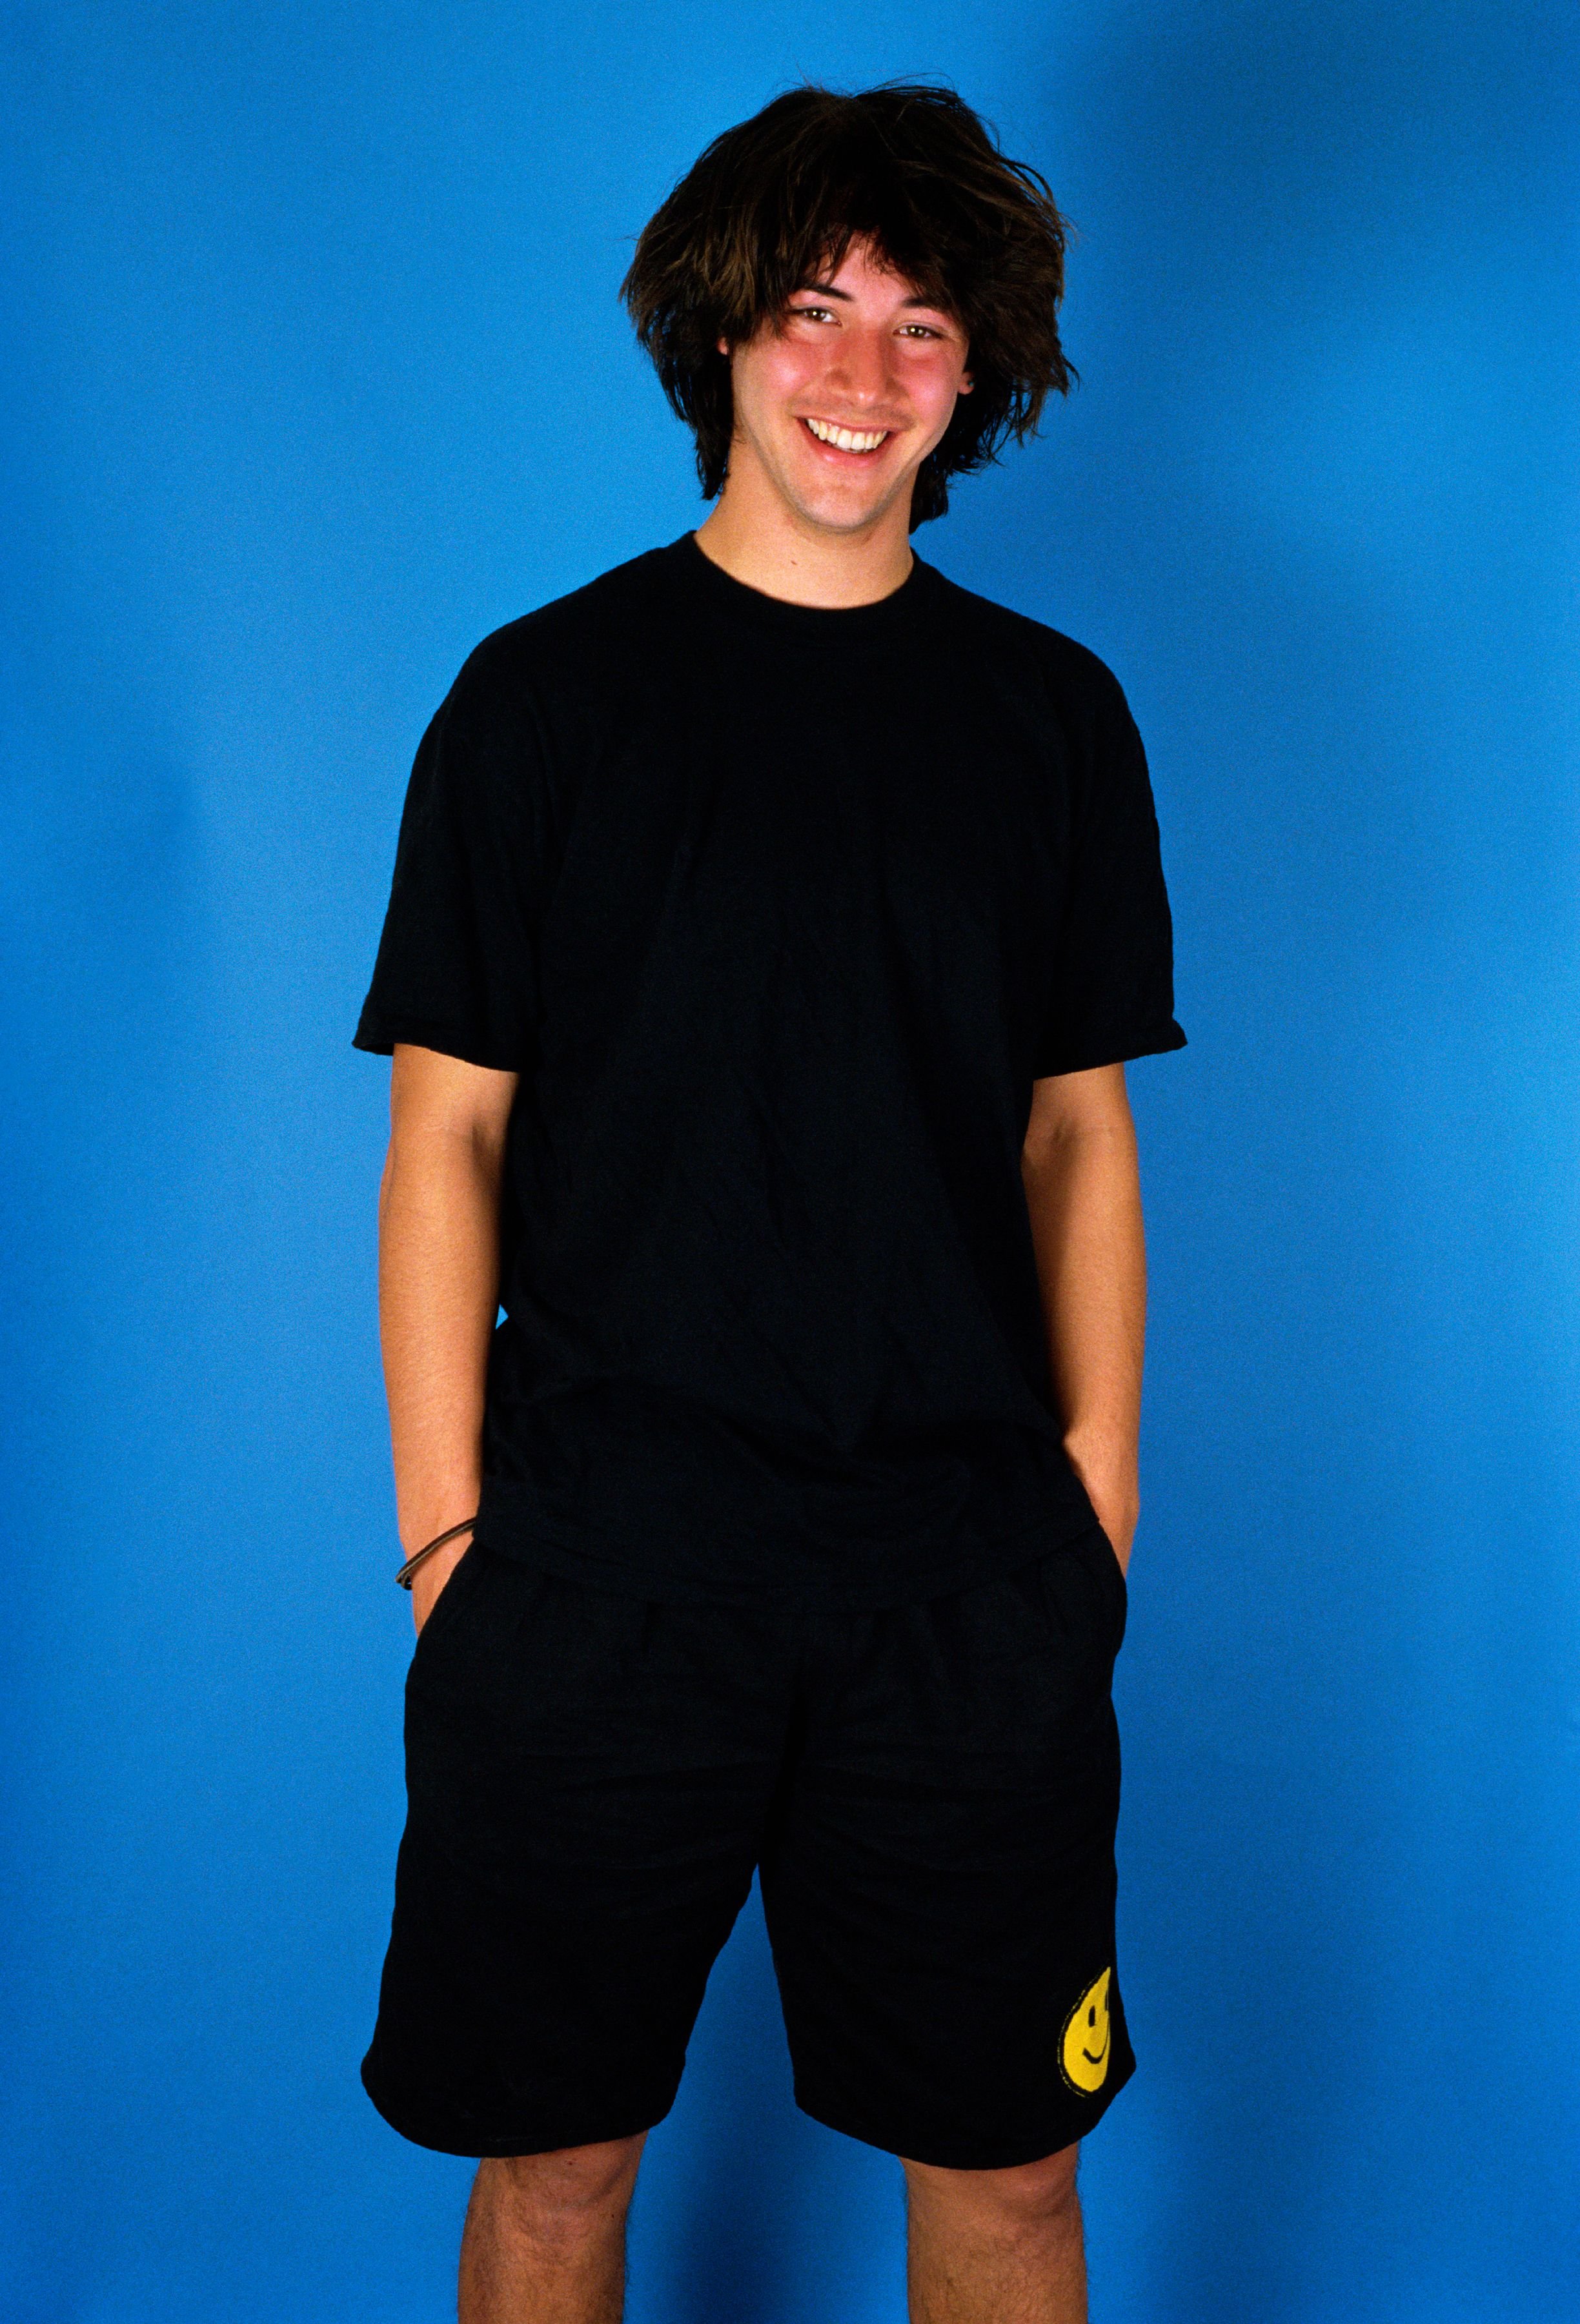 Keanu Reeves poses during a 1987 photo session in West Hollywood, California promoting "Bill & Ted's Excellent Adventure" | Photo: George Rose/Getty Images